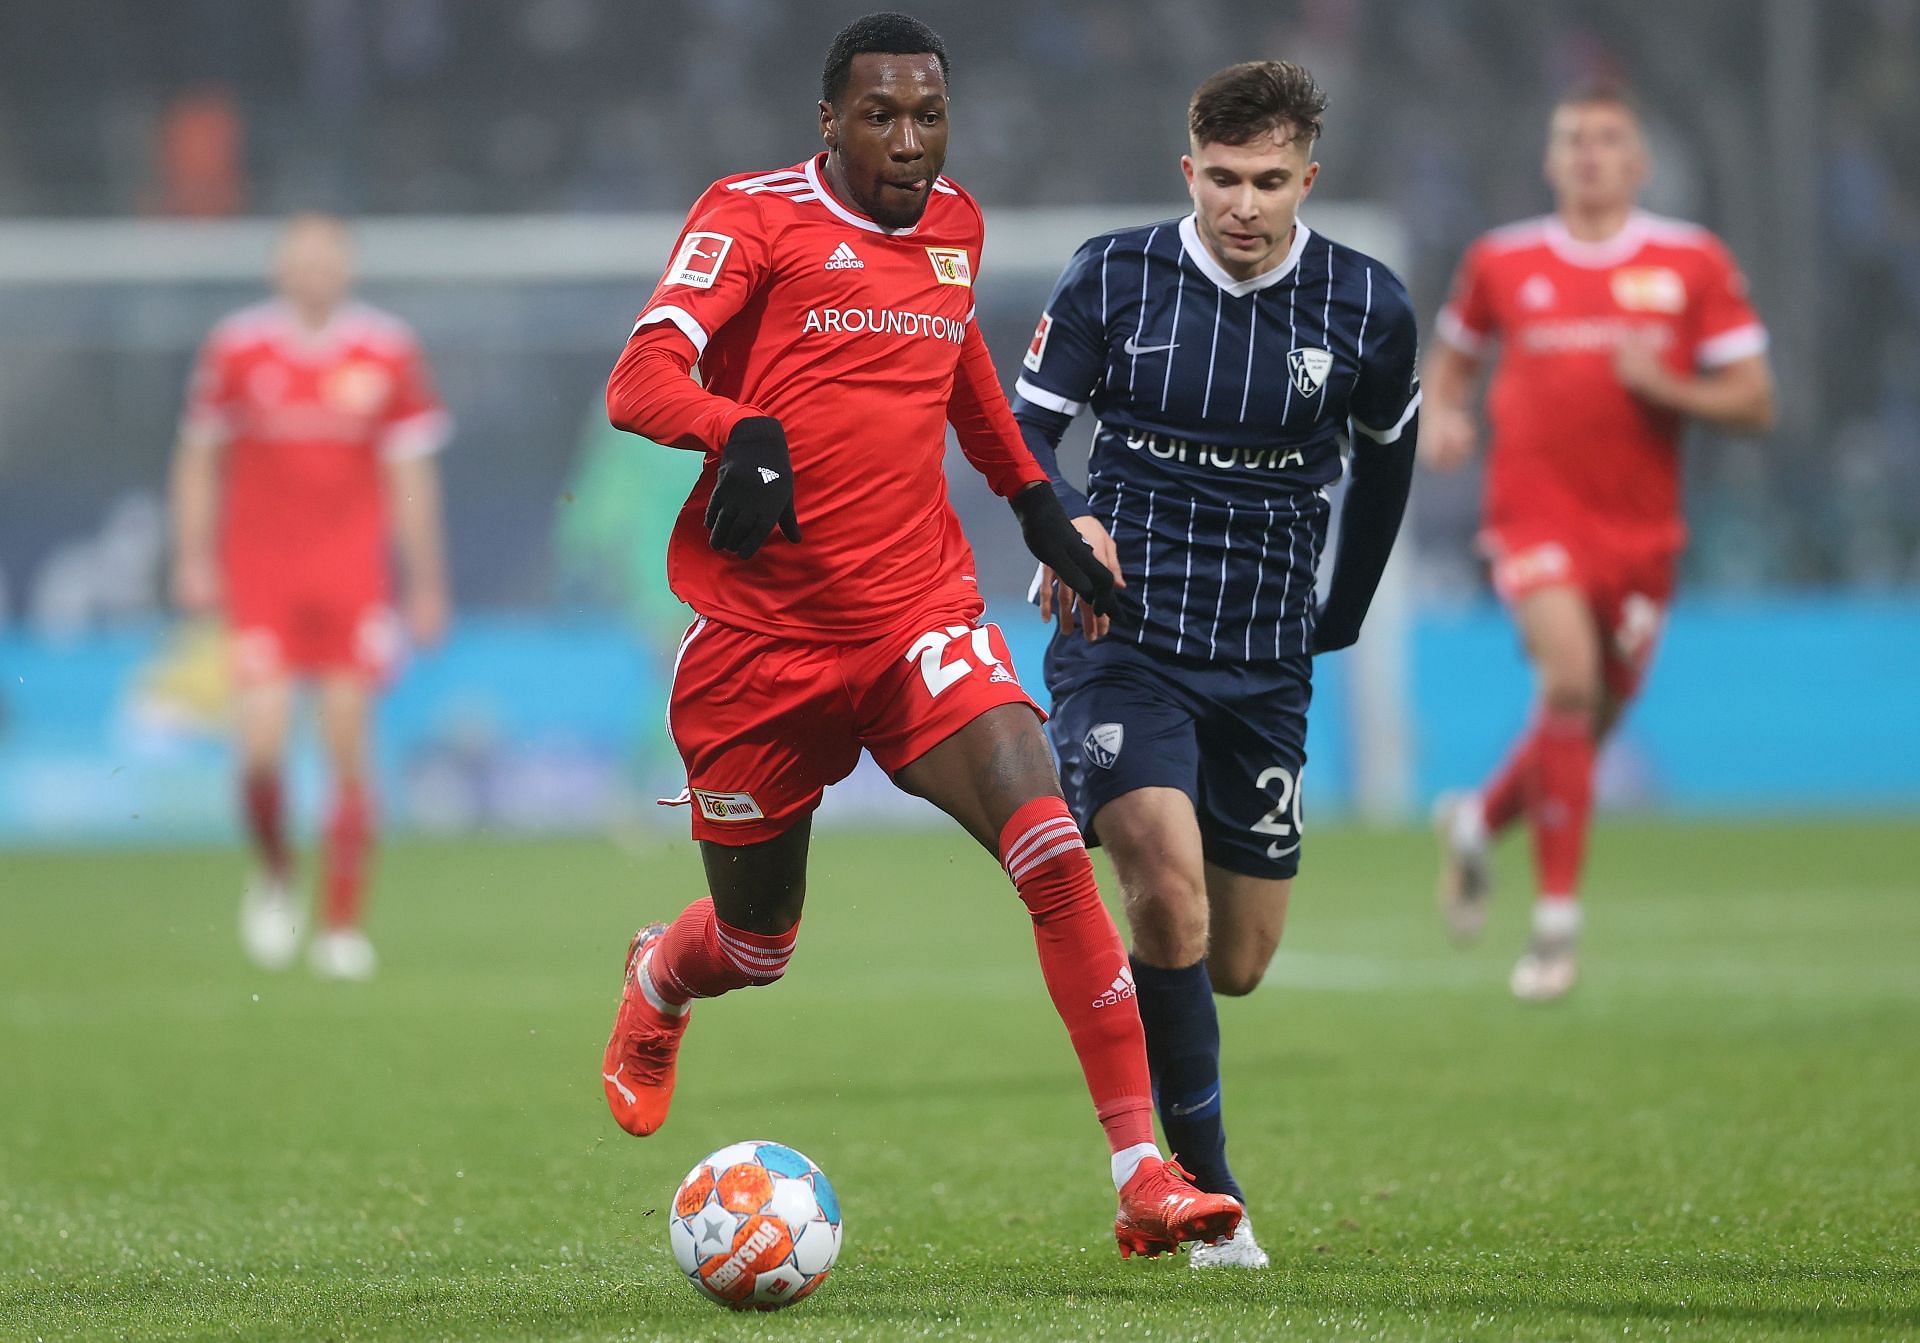 Union Berlin and Bochum square off in their last game of the season on Saturday